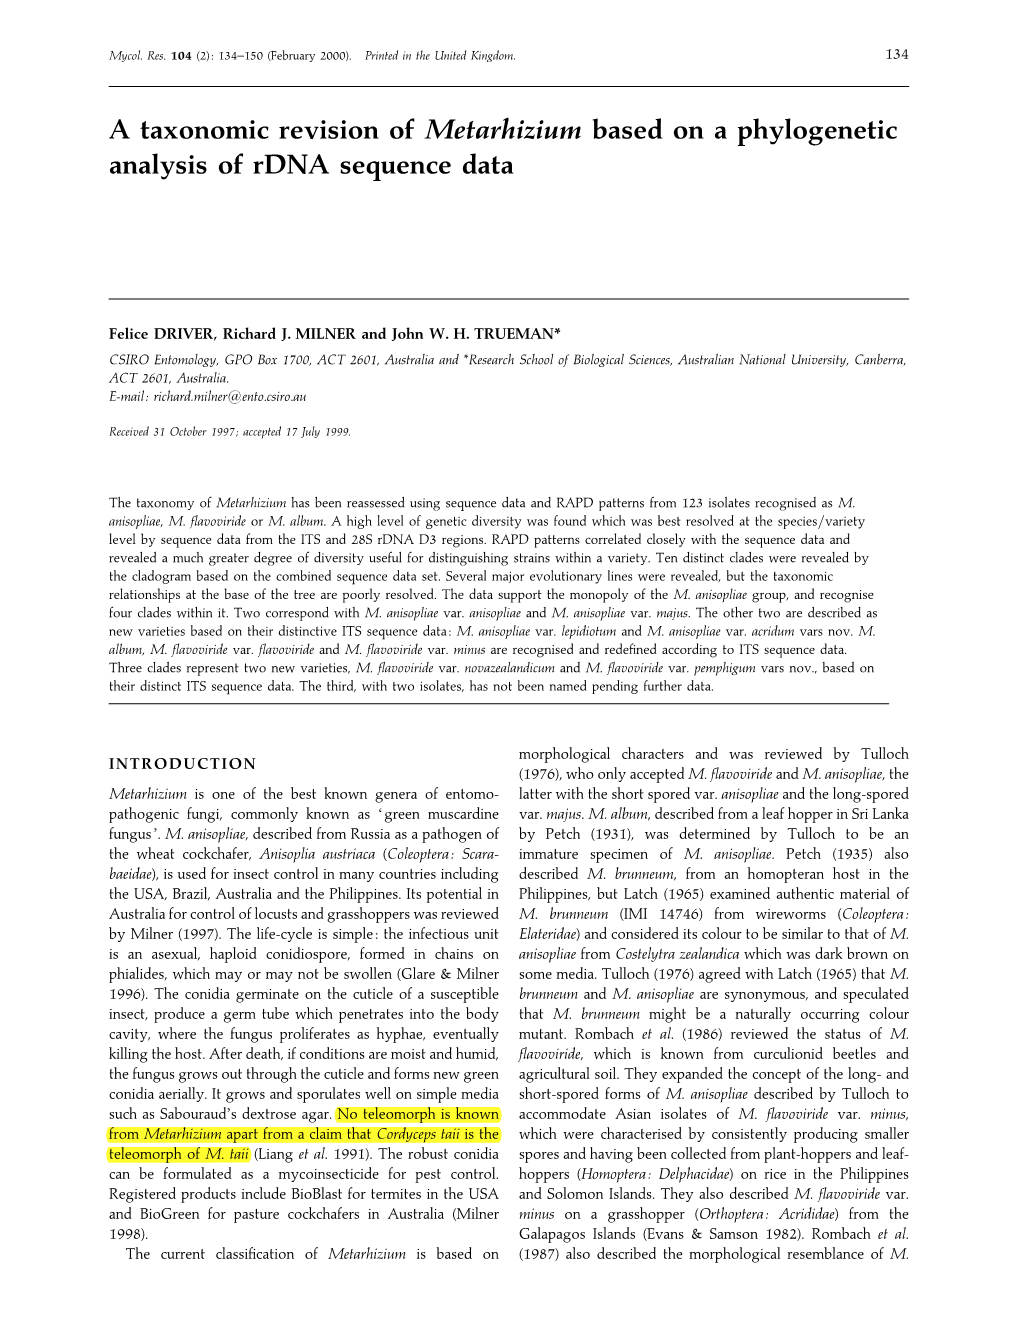 A Taxonomic Revision of Metarhizium Based on a Phylogenetic Analysis of Rdna Sequence Data